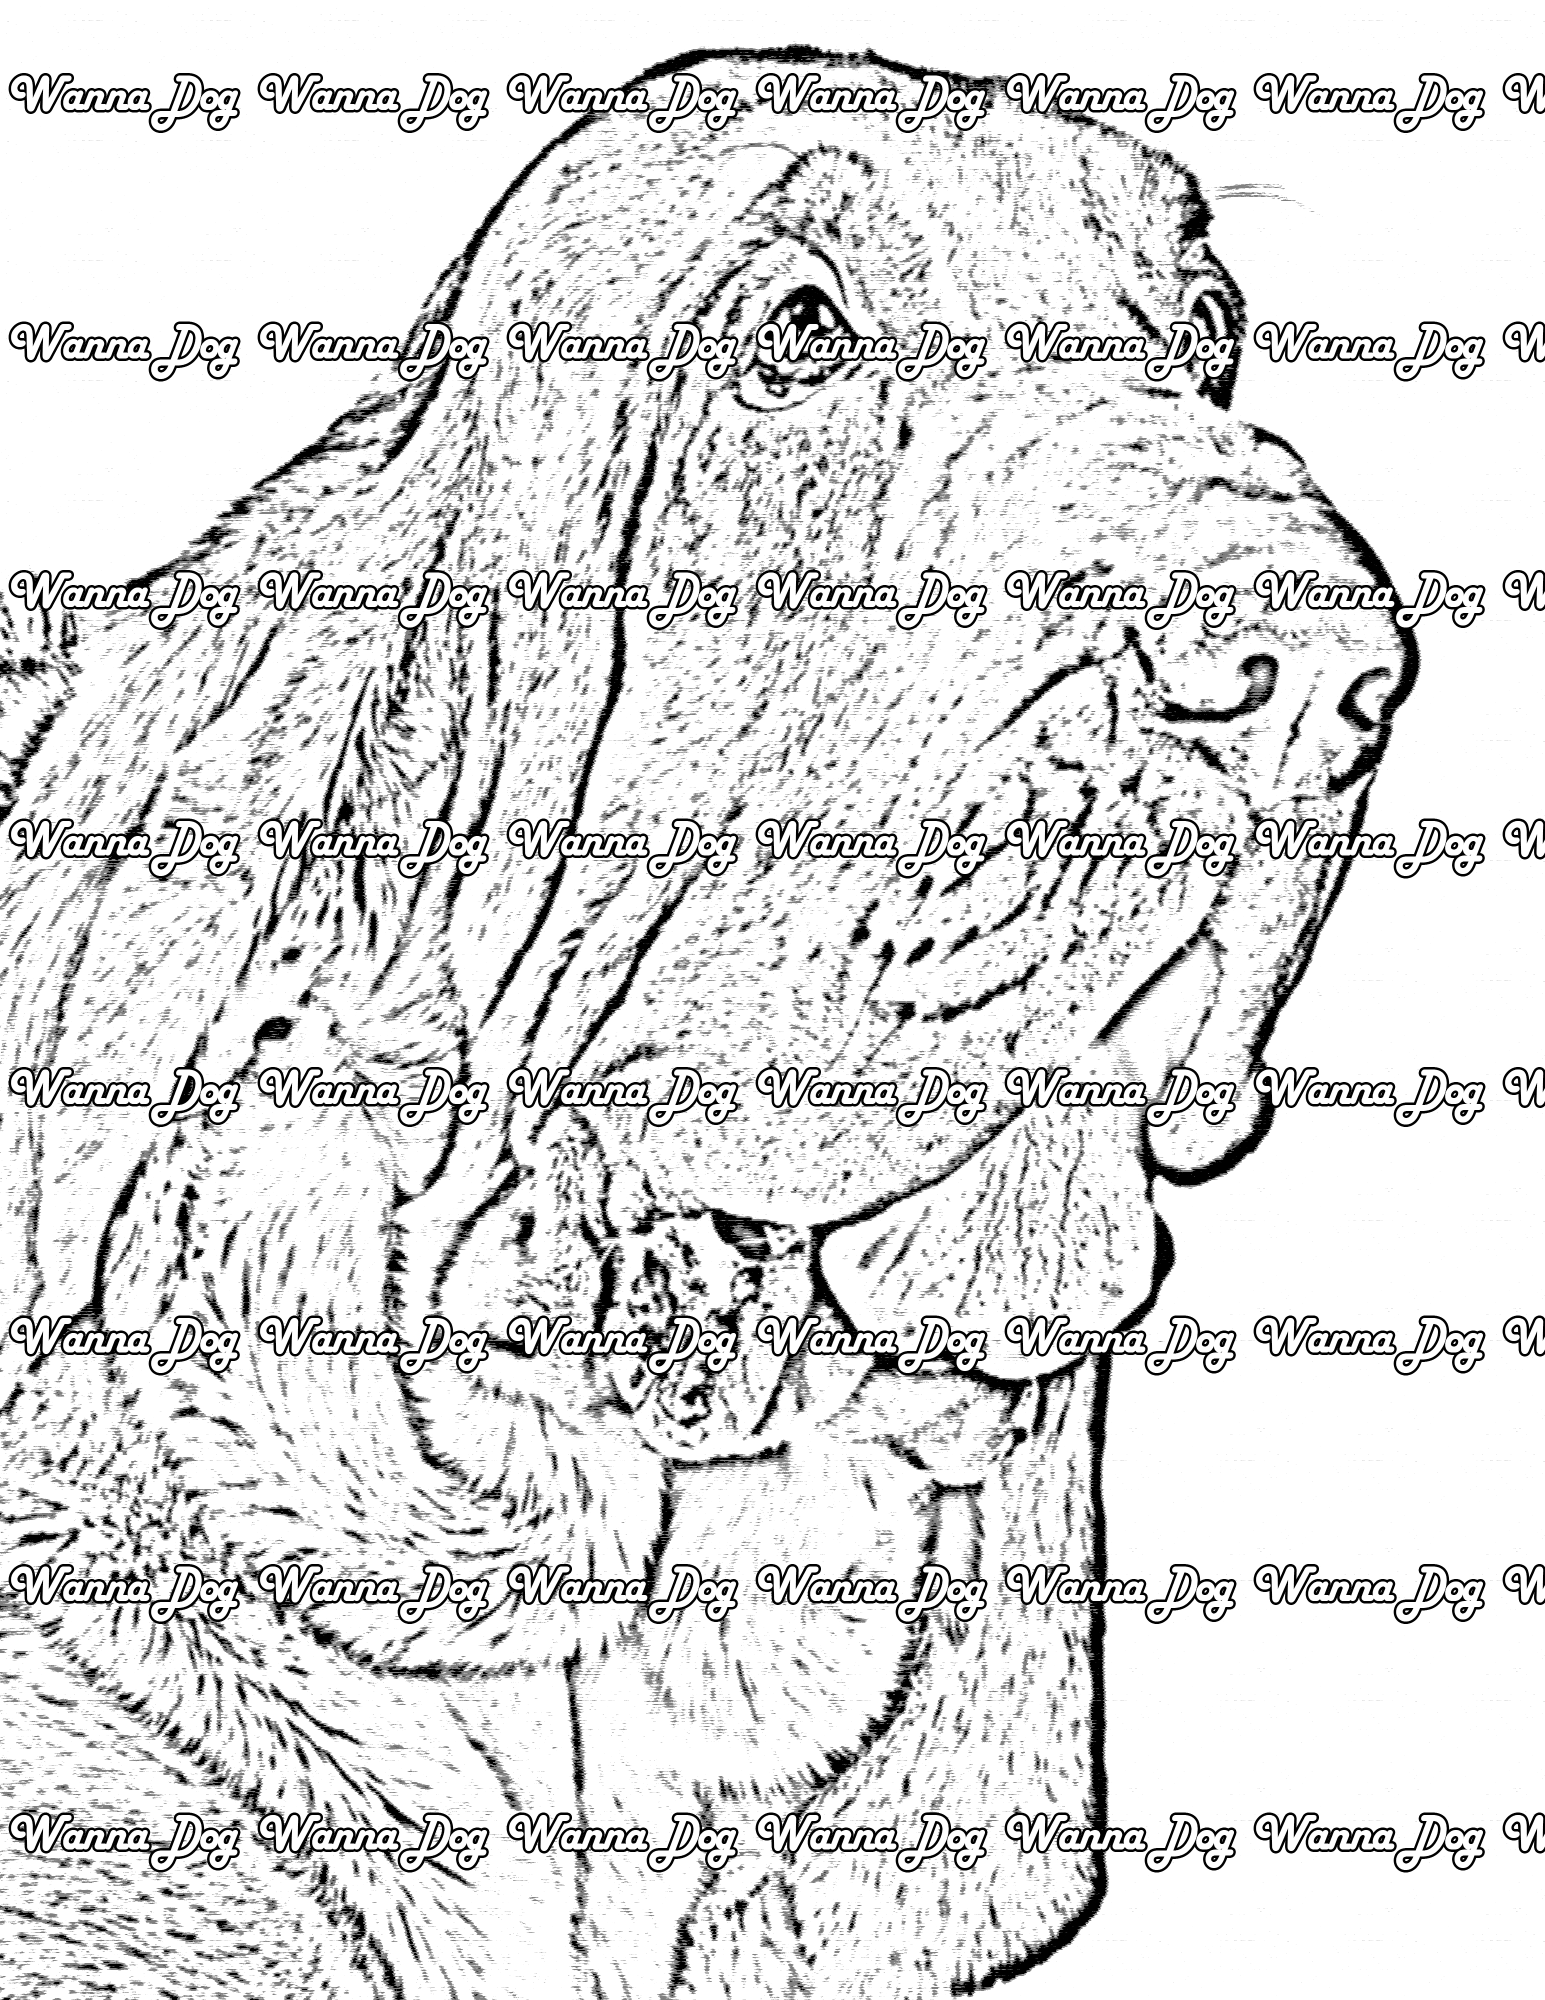 Bloodhound Coloring Page of a Bloodhound looking away from the camera